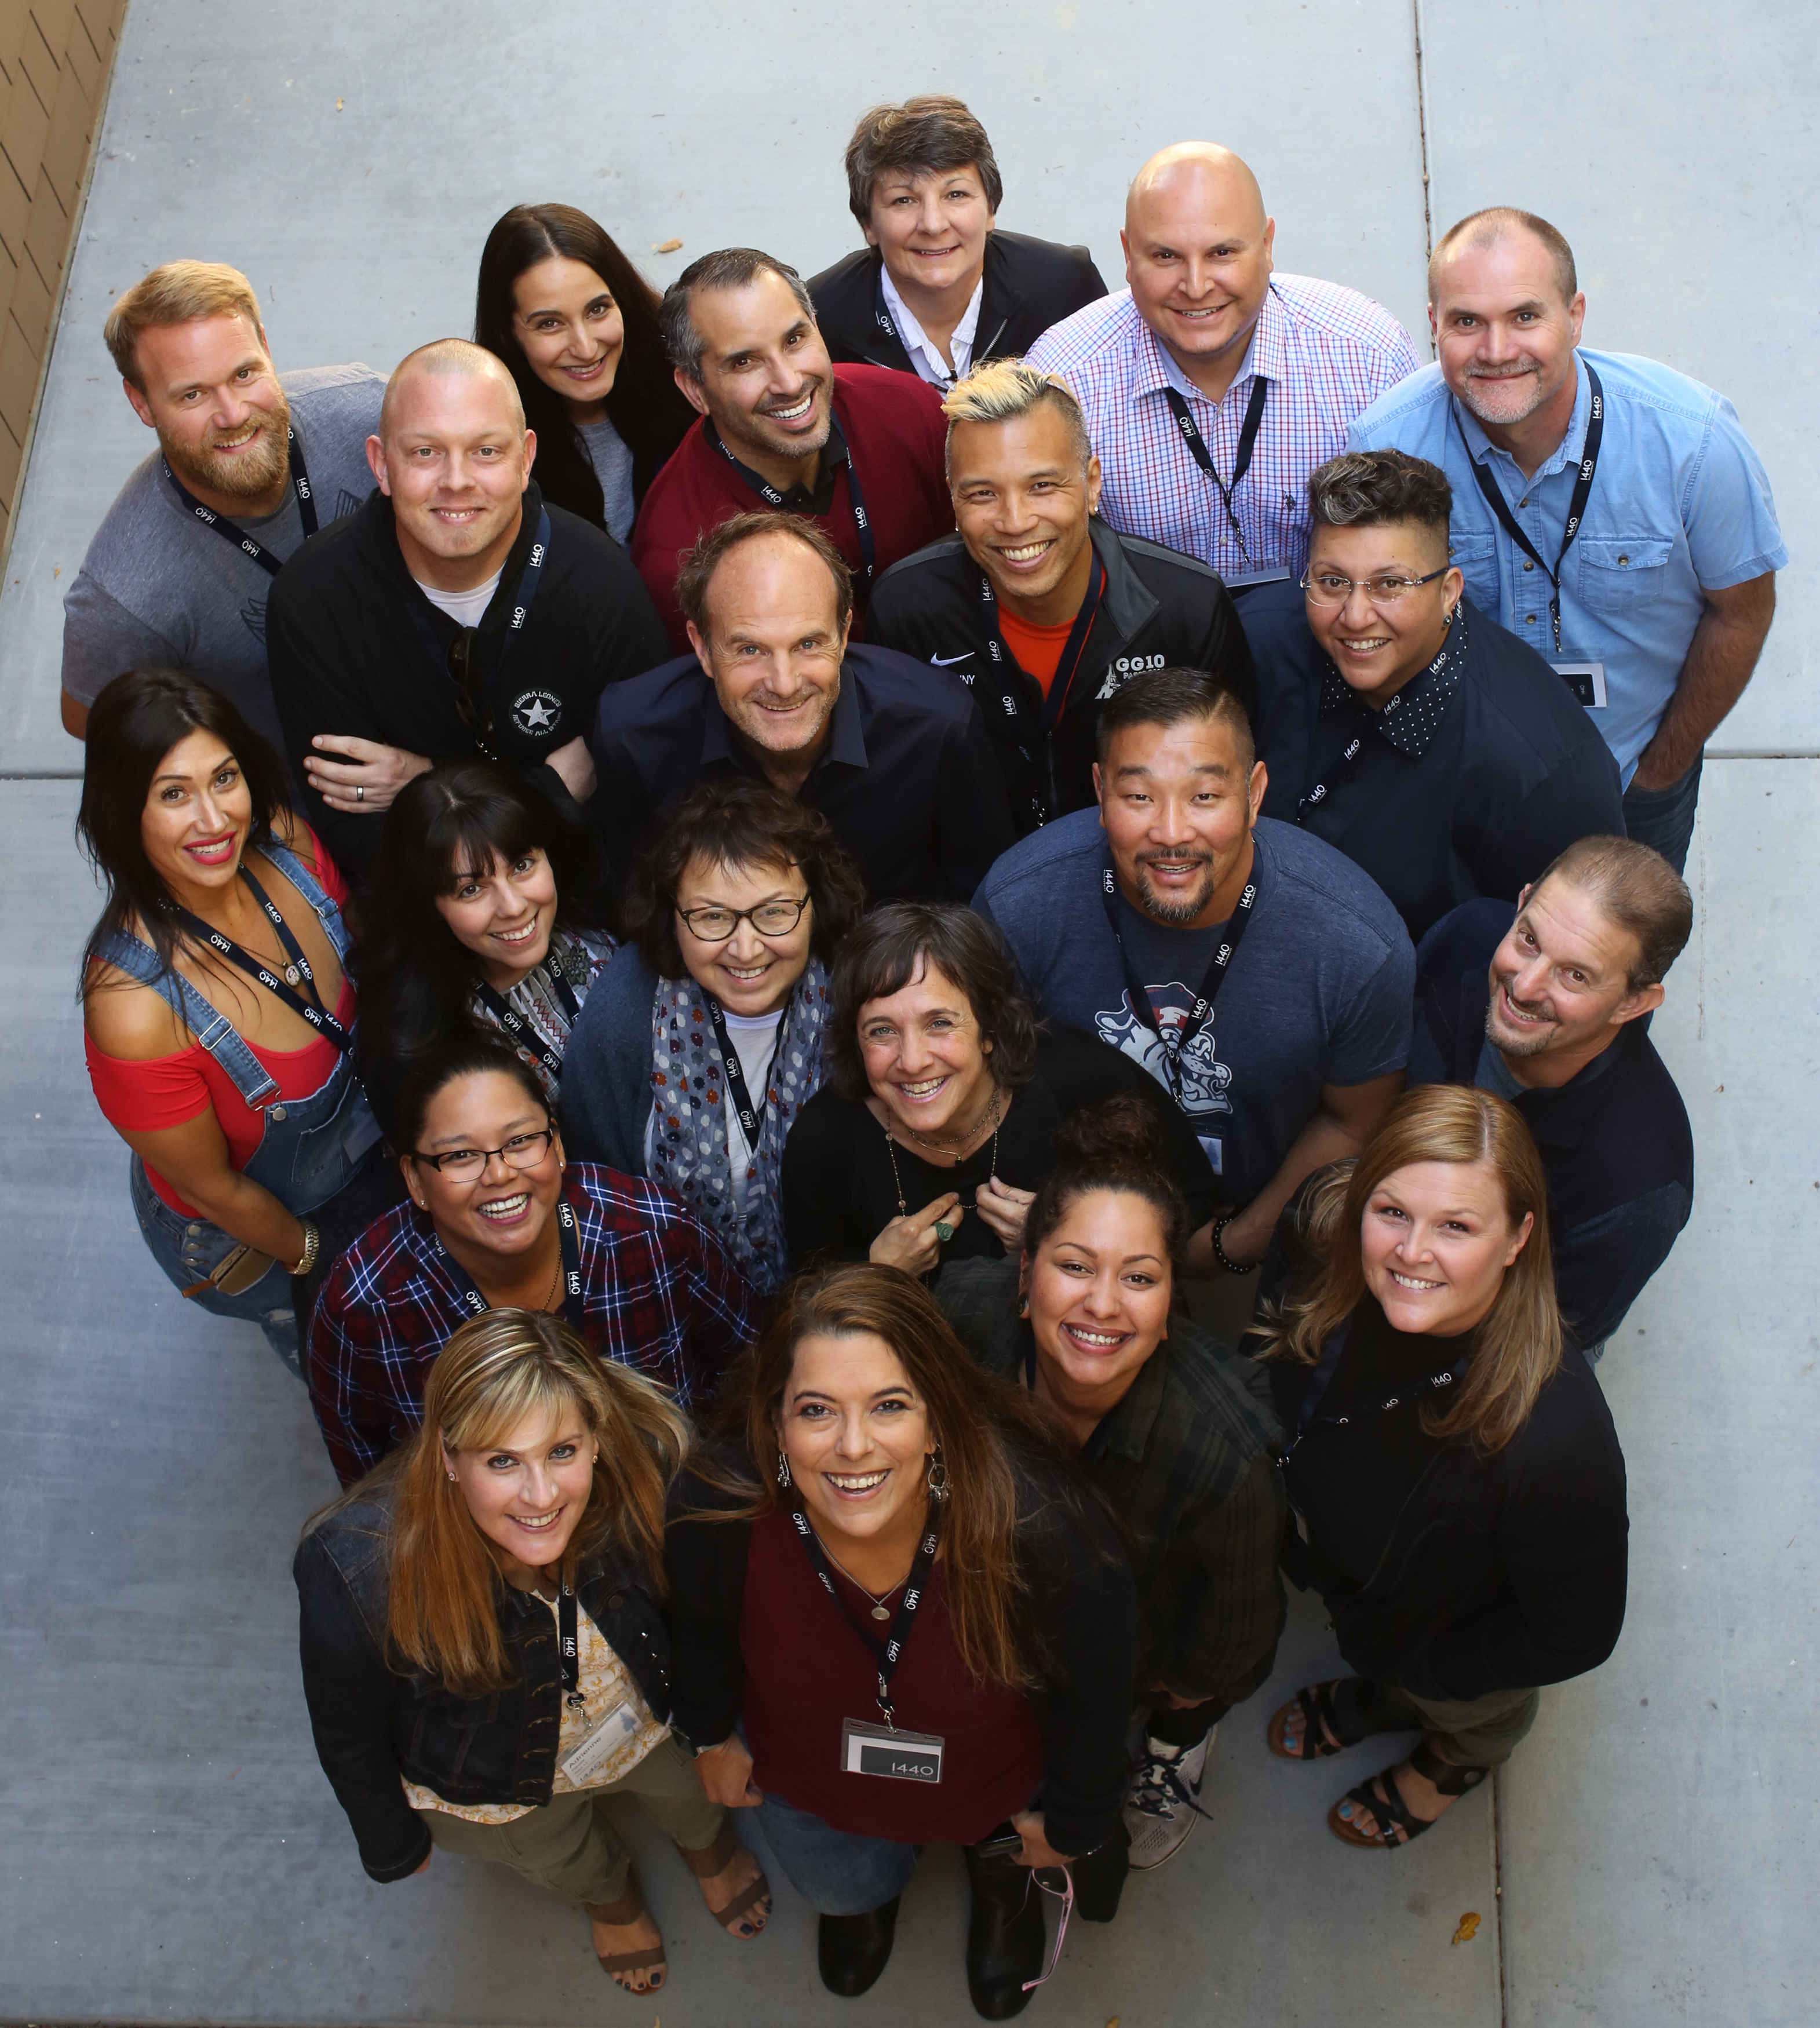 A diverse group of individuals wearing lanyards are standing close together, smiling and gazing up towards the photographer for a group photo.